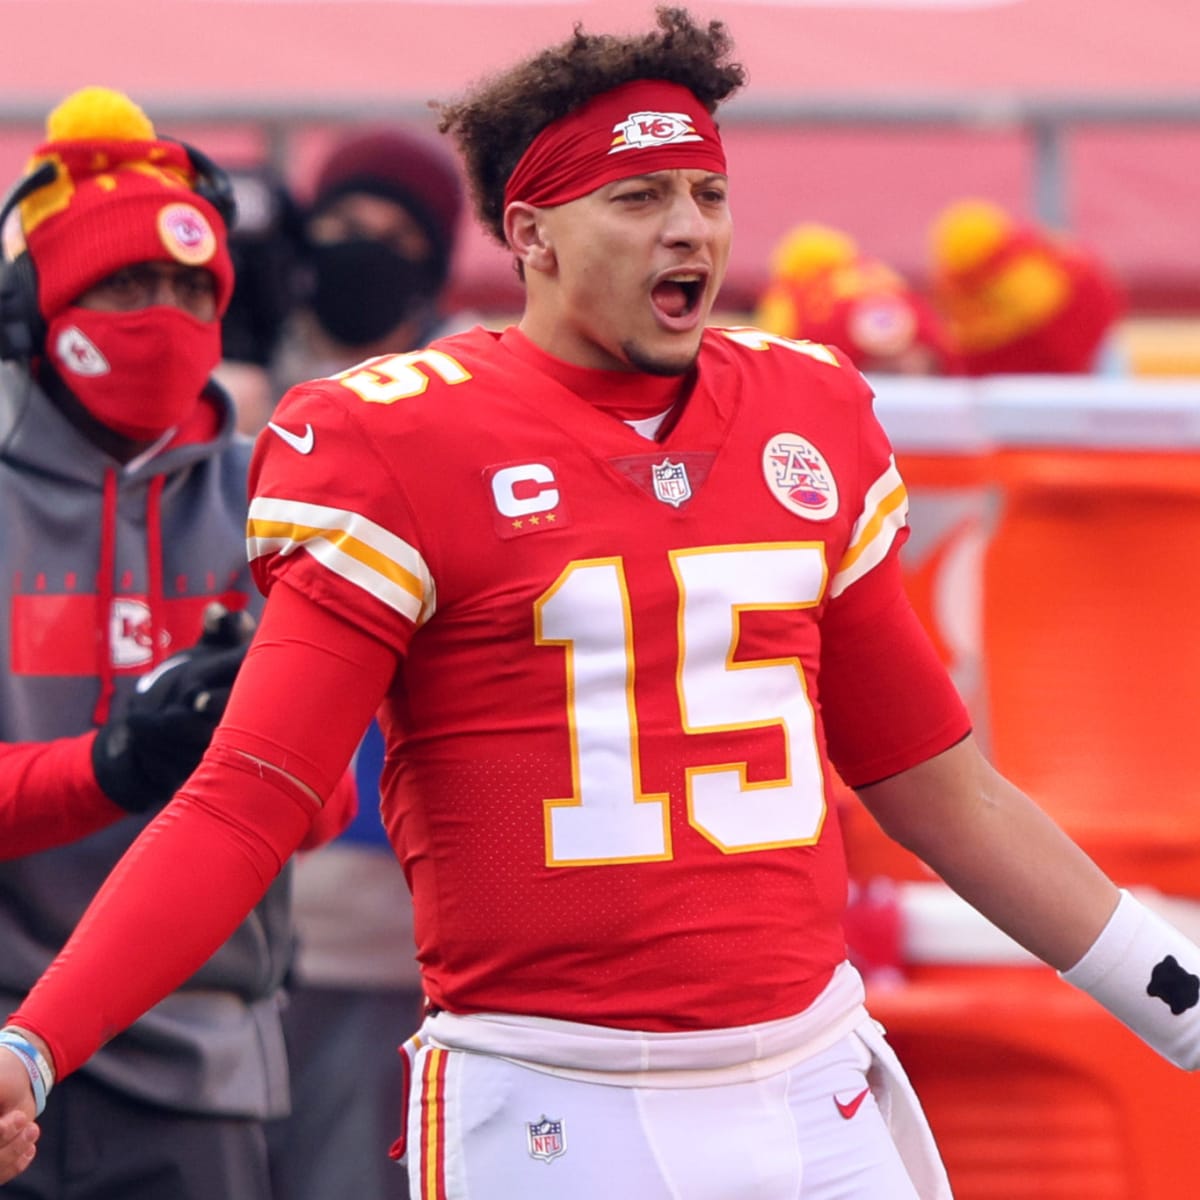 Young Patrick Mahomes picked Eagles to win Super Bowl in viral